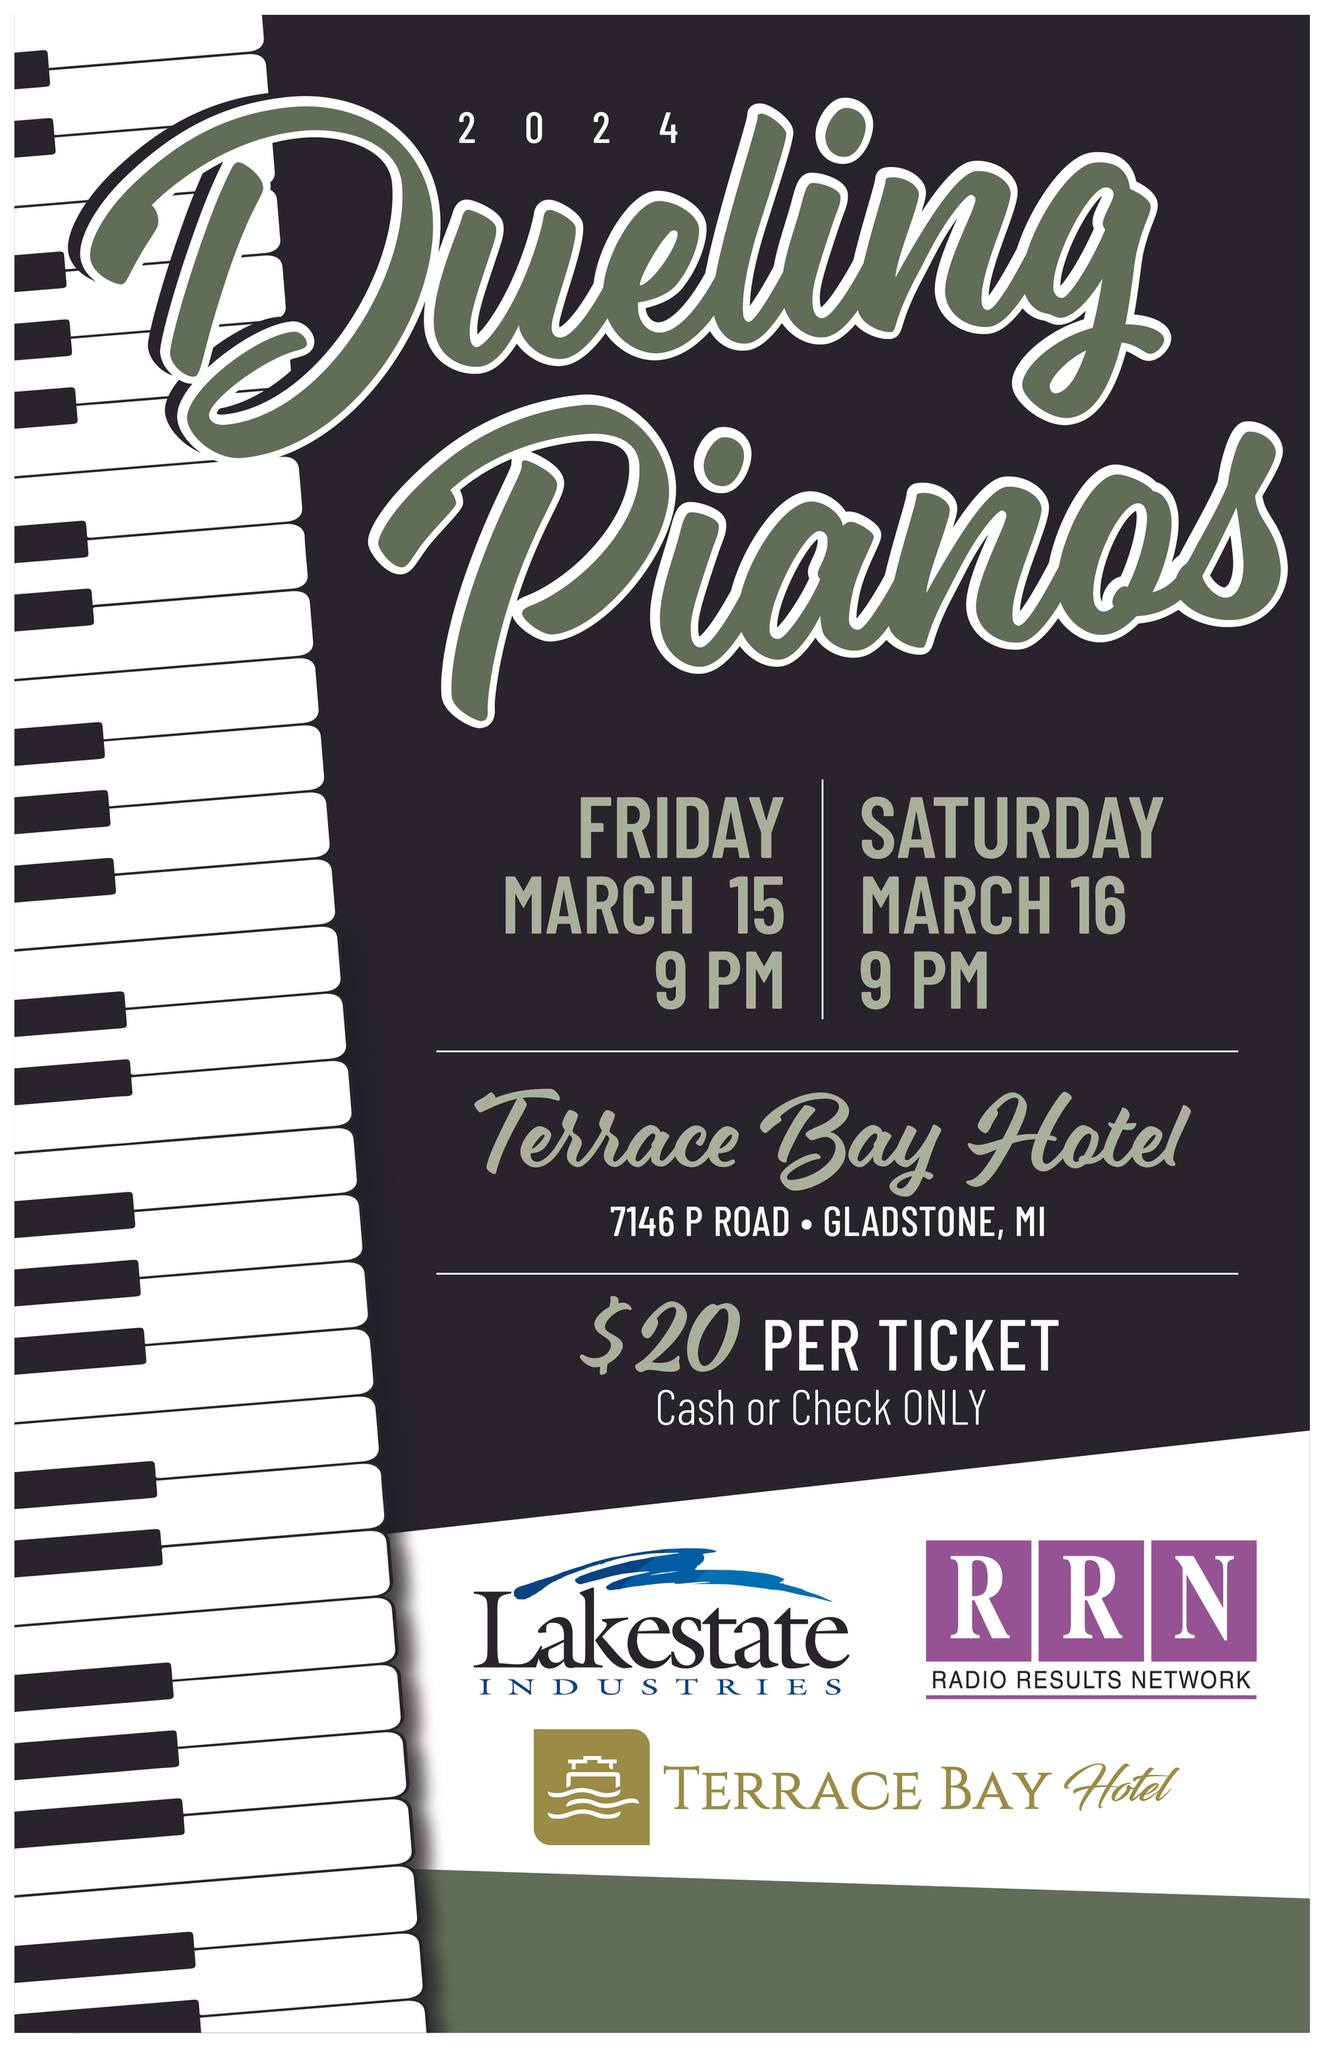 Dueling Pianos, March 15th – 16th @ Terrace Bay Hotel